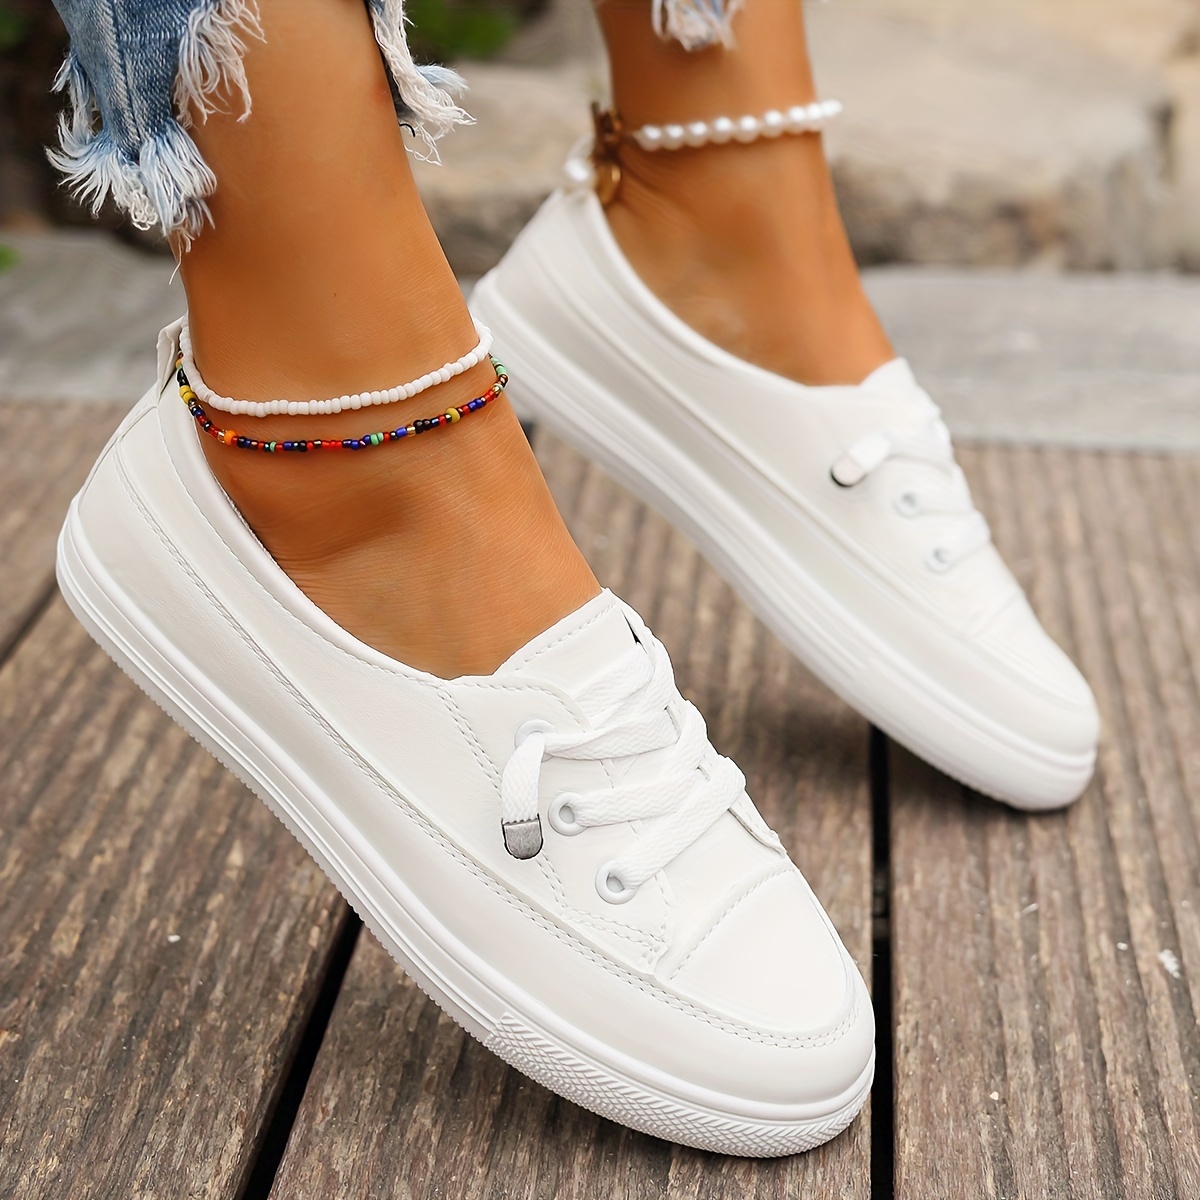 white skate shoes women s casual low top slip flat shoes details 3